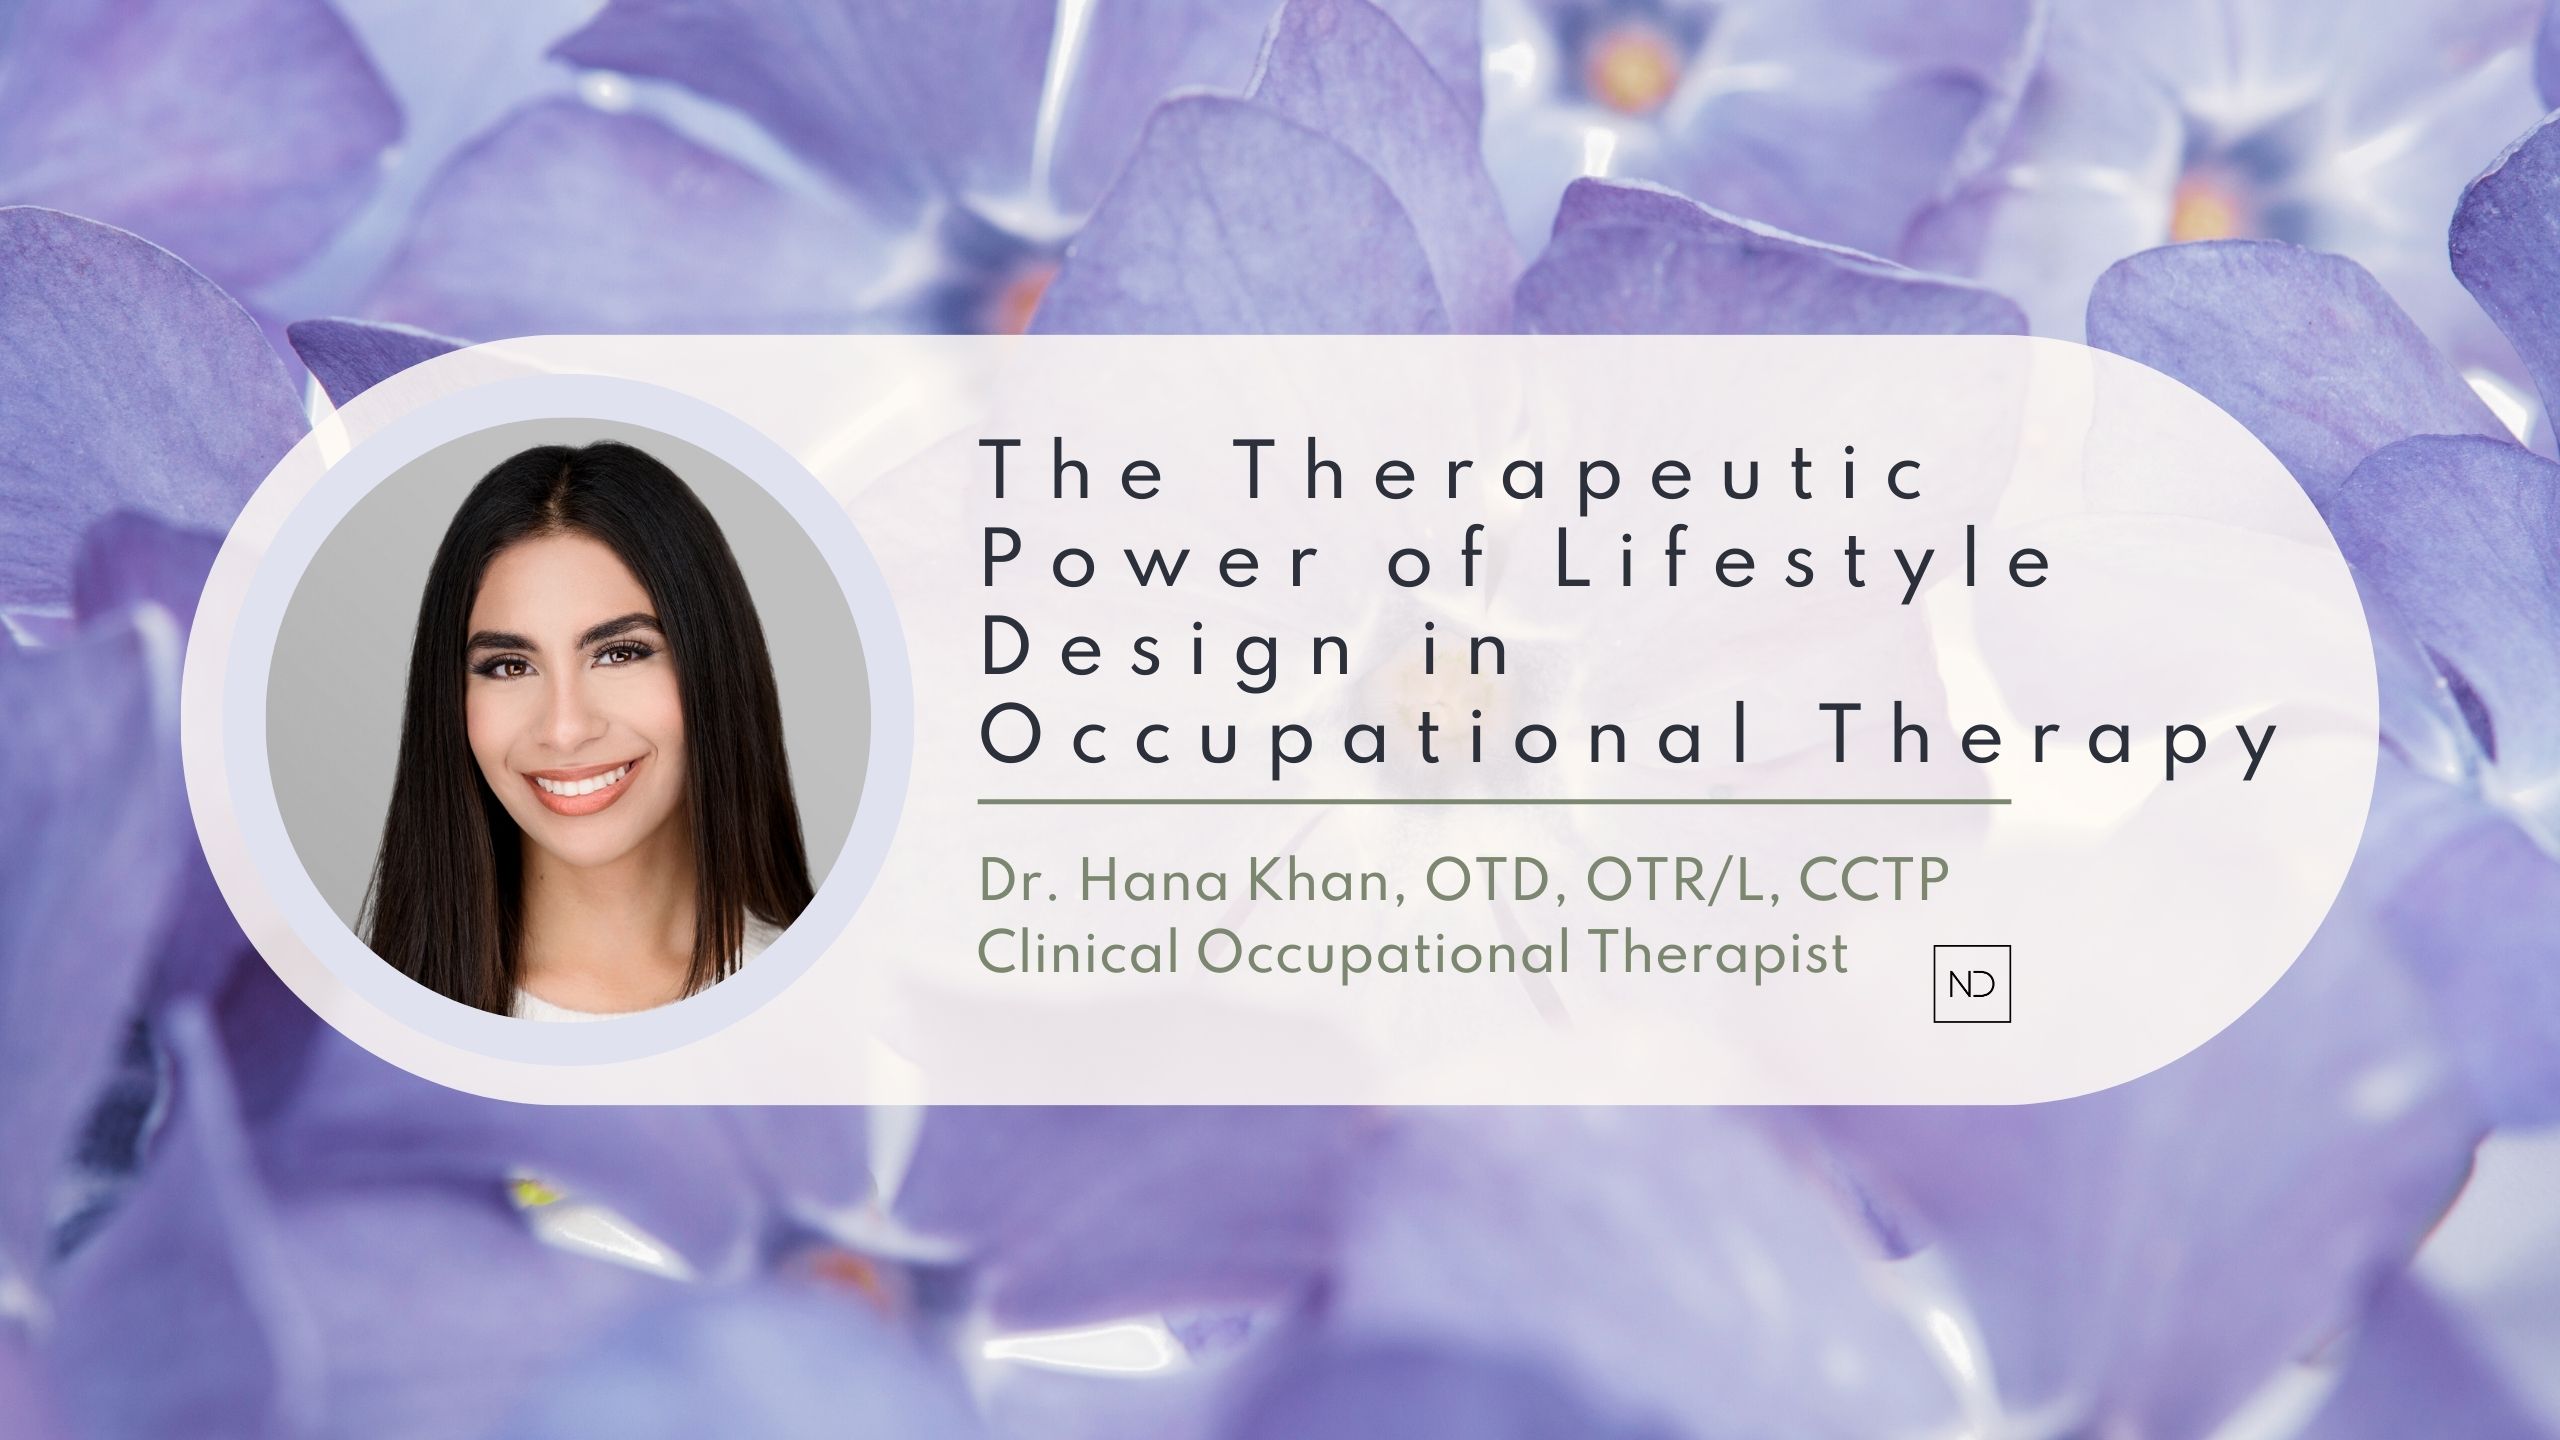 The Therapeutic Power of Lifestyle Design in Occupational Therapy